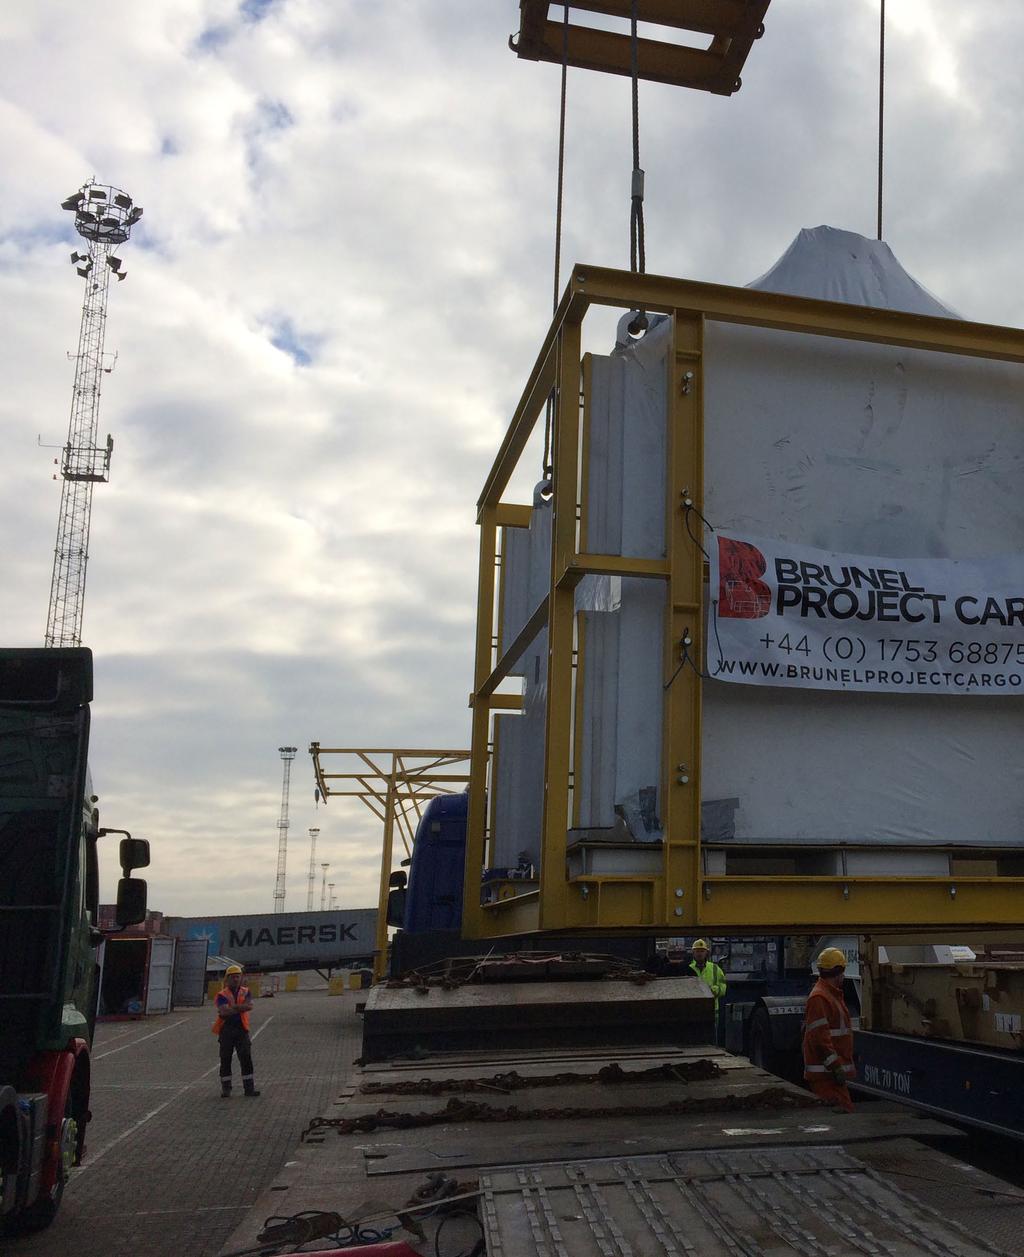 Brunel Project Cargo is the specialist projects and heavy lift division for the Brunel Group of companies, and was established to provide innovative and bespoke customer centric project cargo